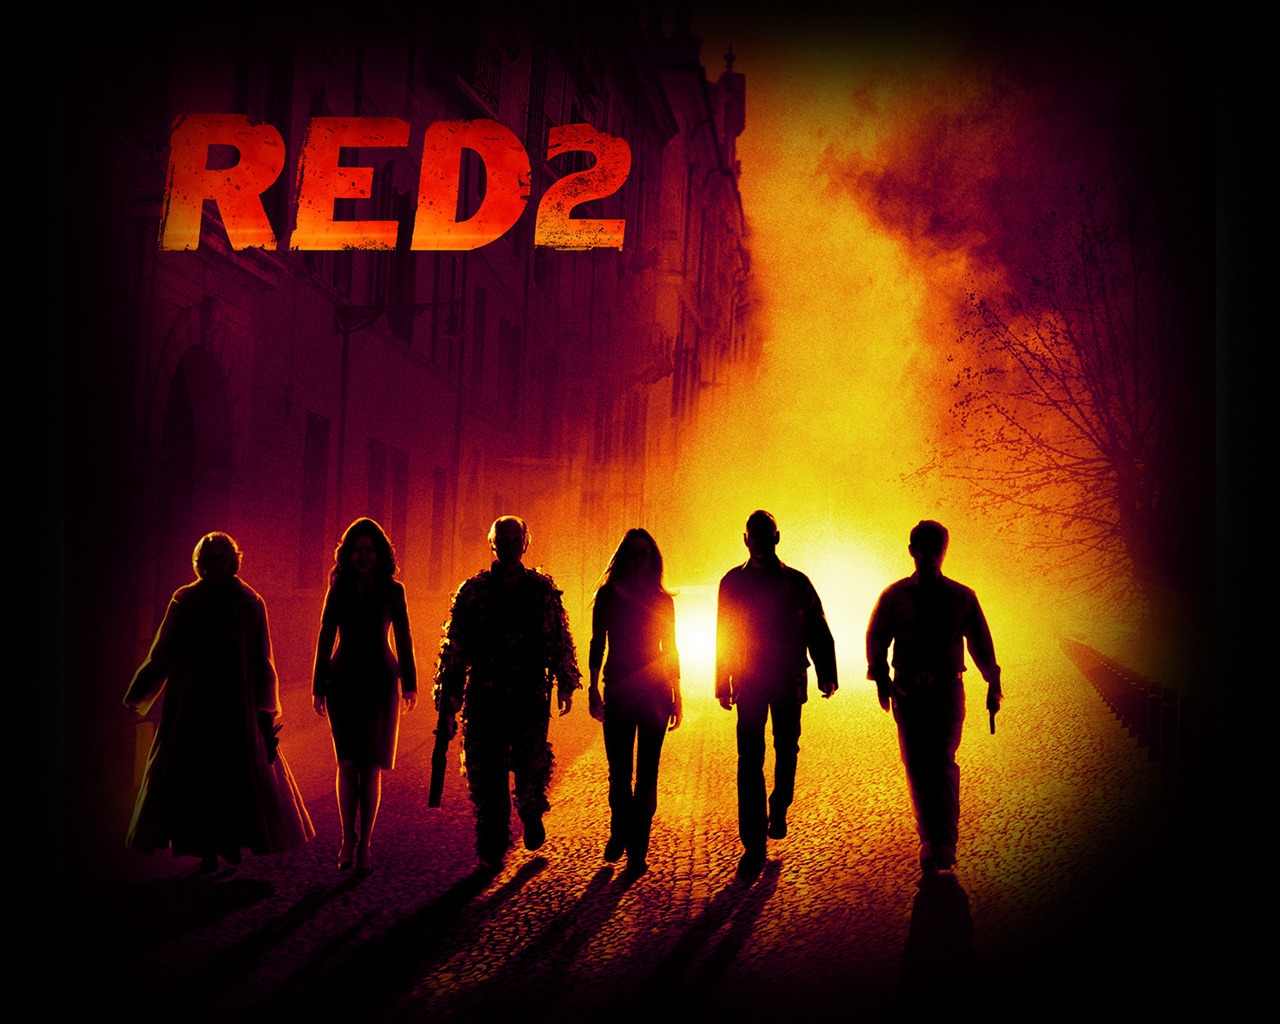 2013 RED 2 for 1280 x 1024 resolution